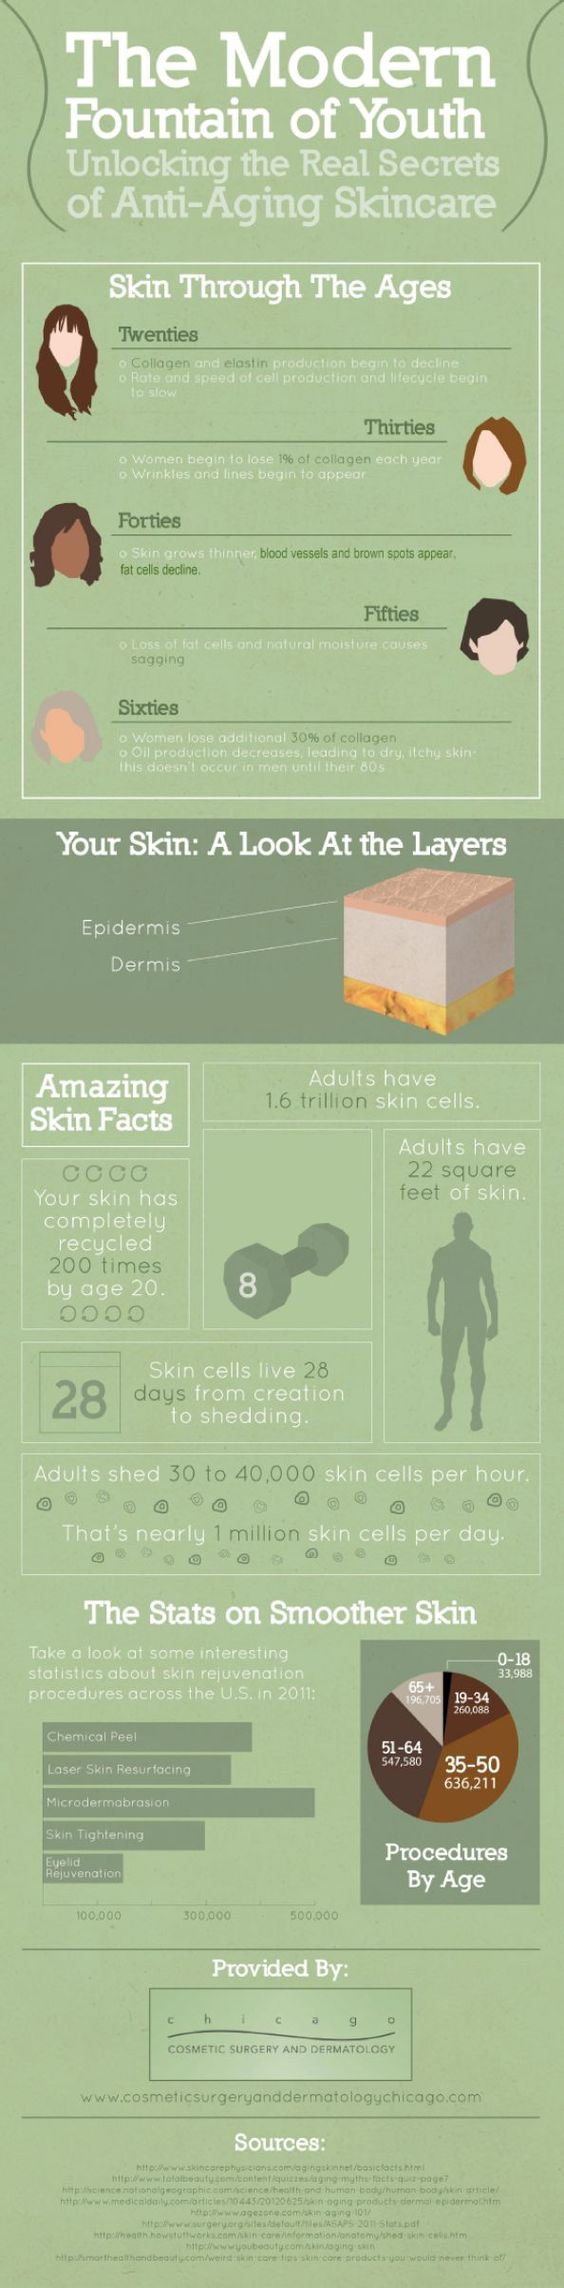 anti aging skincare facts 